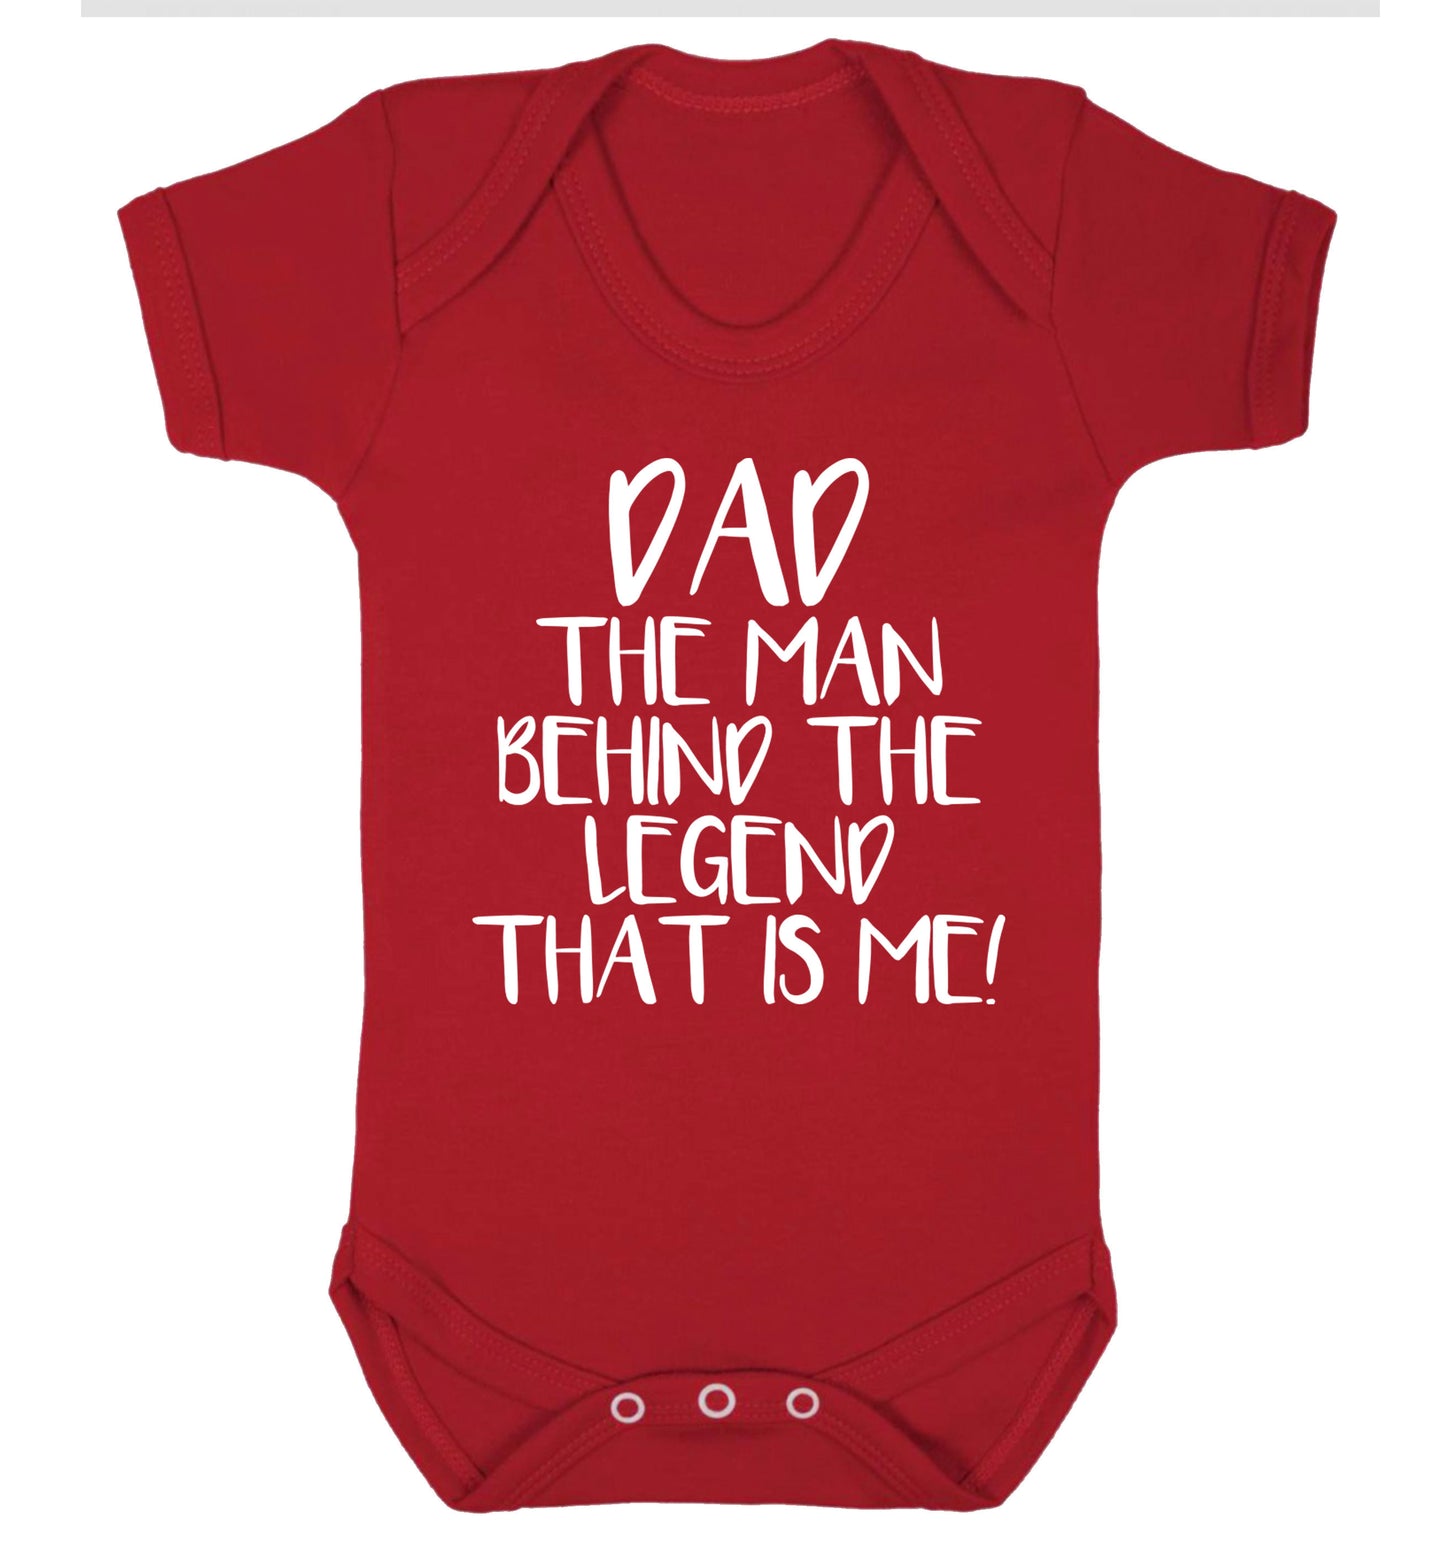 Dad the man behind the legend that is me! Baby Vest red 18-24 months